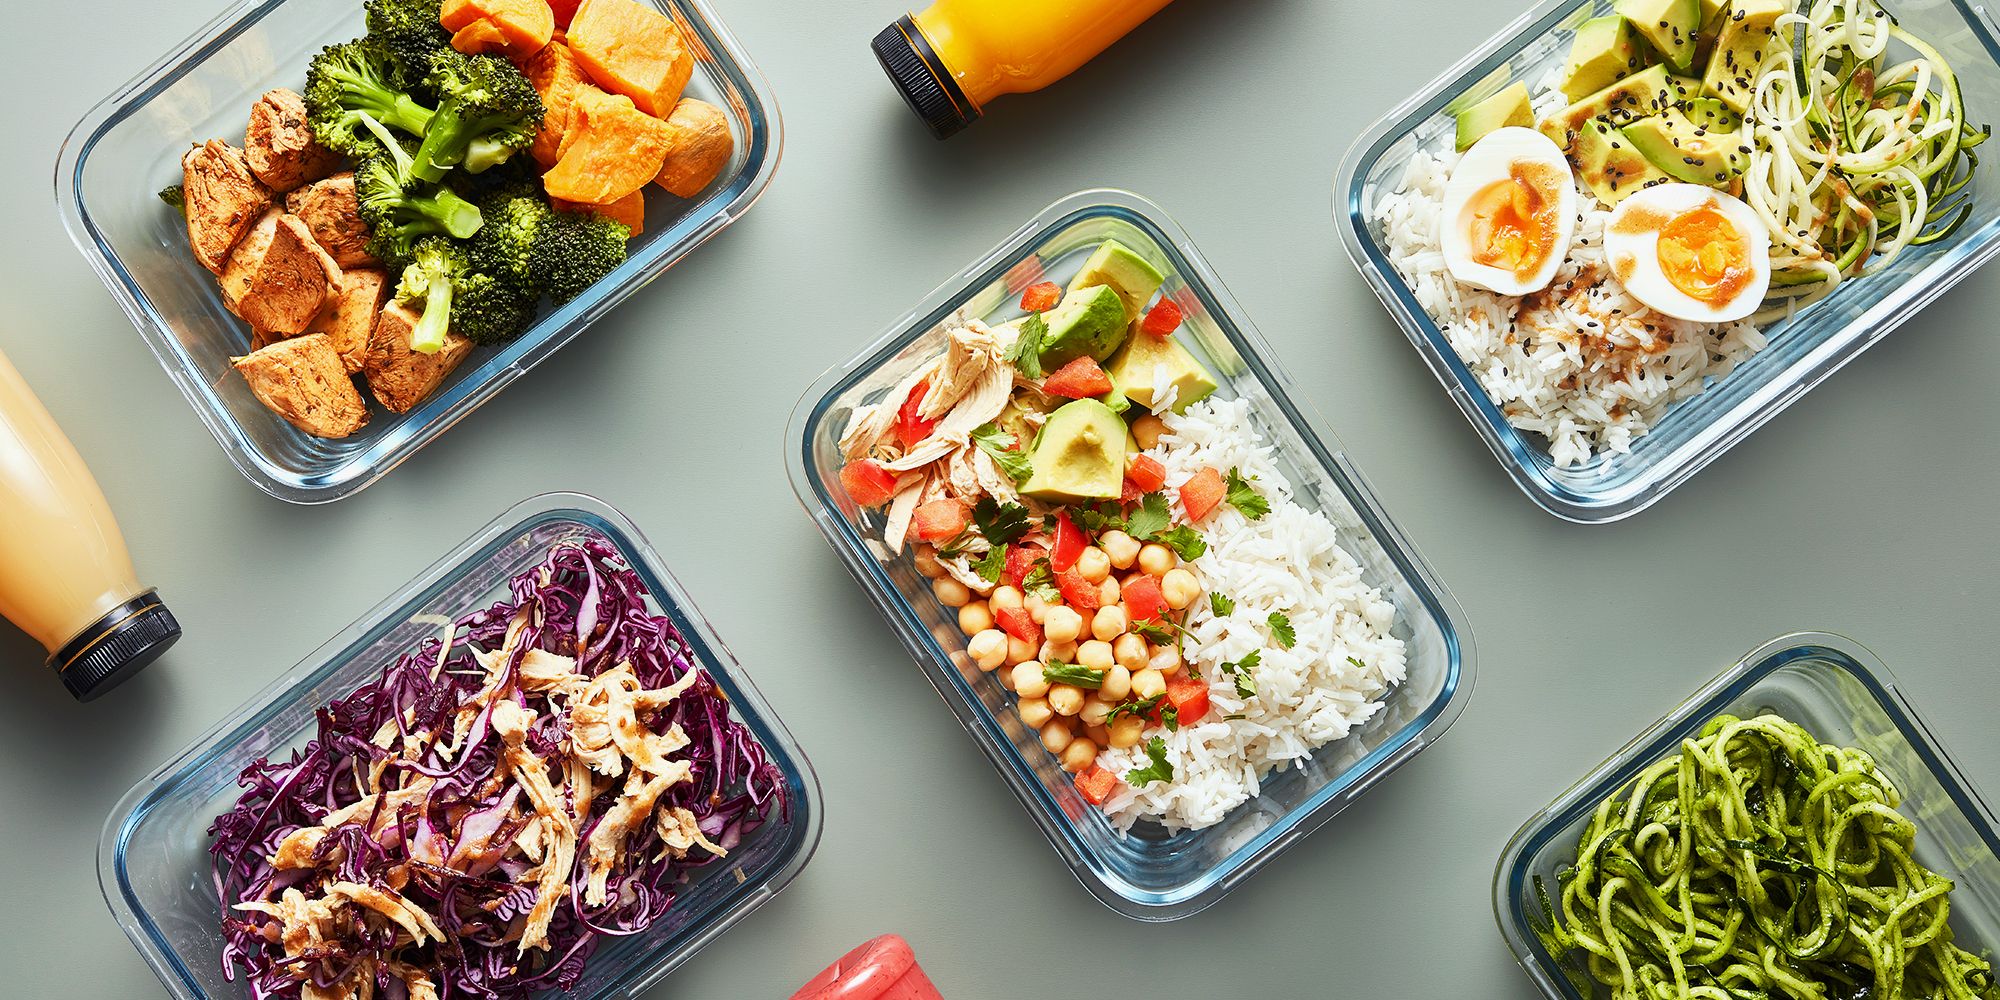 https://hips.hearstapps.com/hmg-prod/images/meal-prep-containers-1578587626.jpg